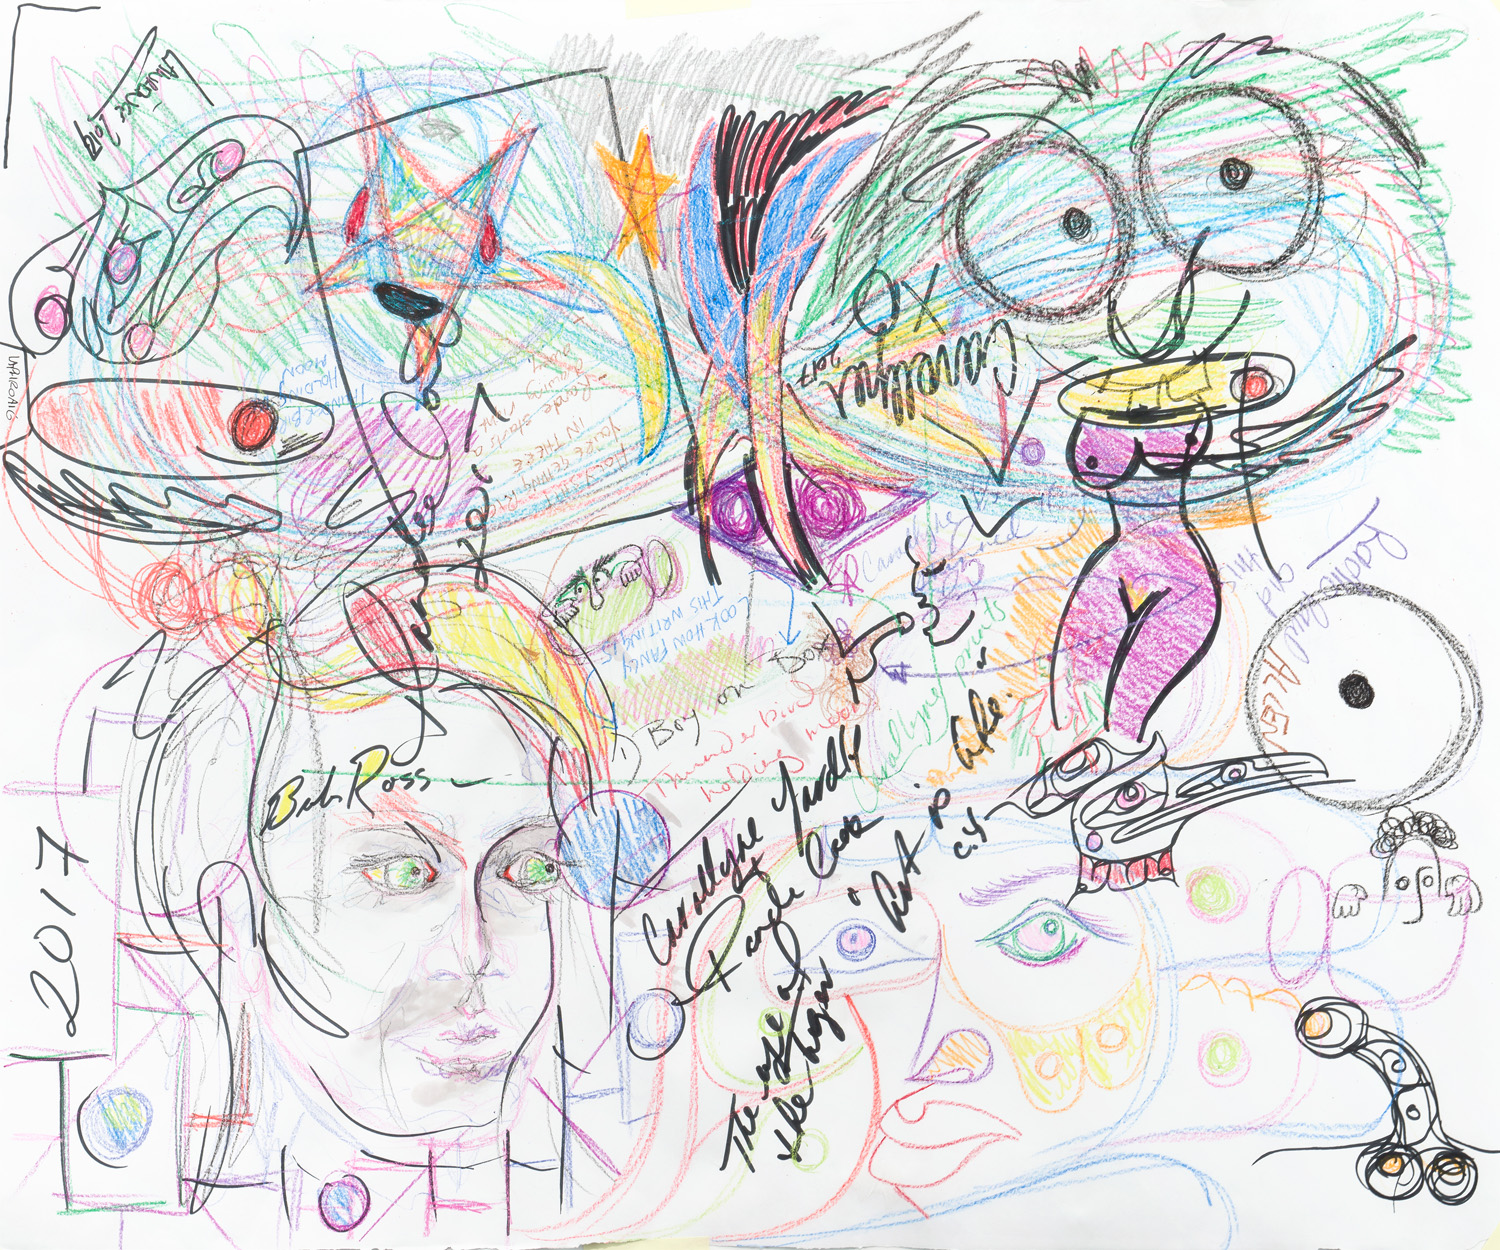 Collaboration Planning Document, 2017, Rande Cook and Carollyne Yardley, Crayon on paper, 36” x 28”